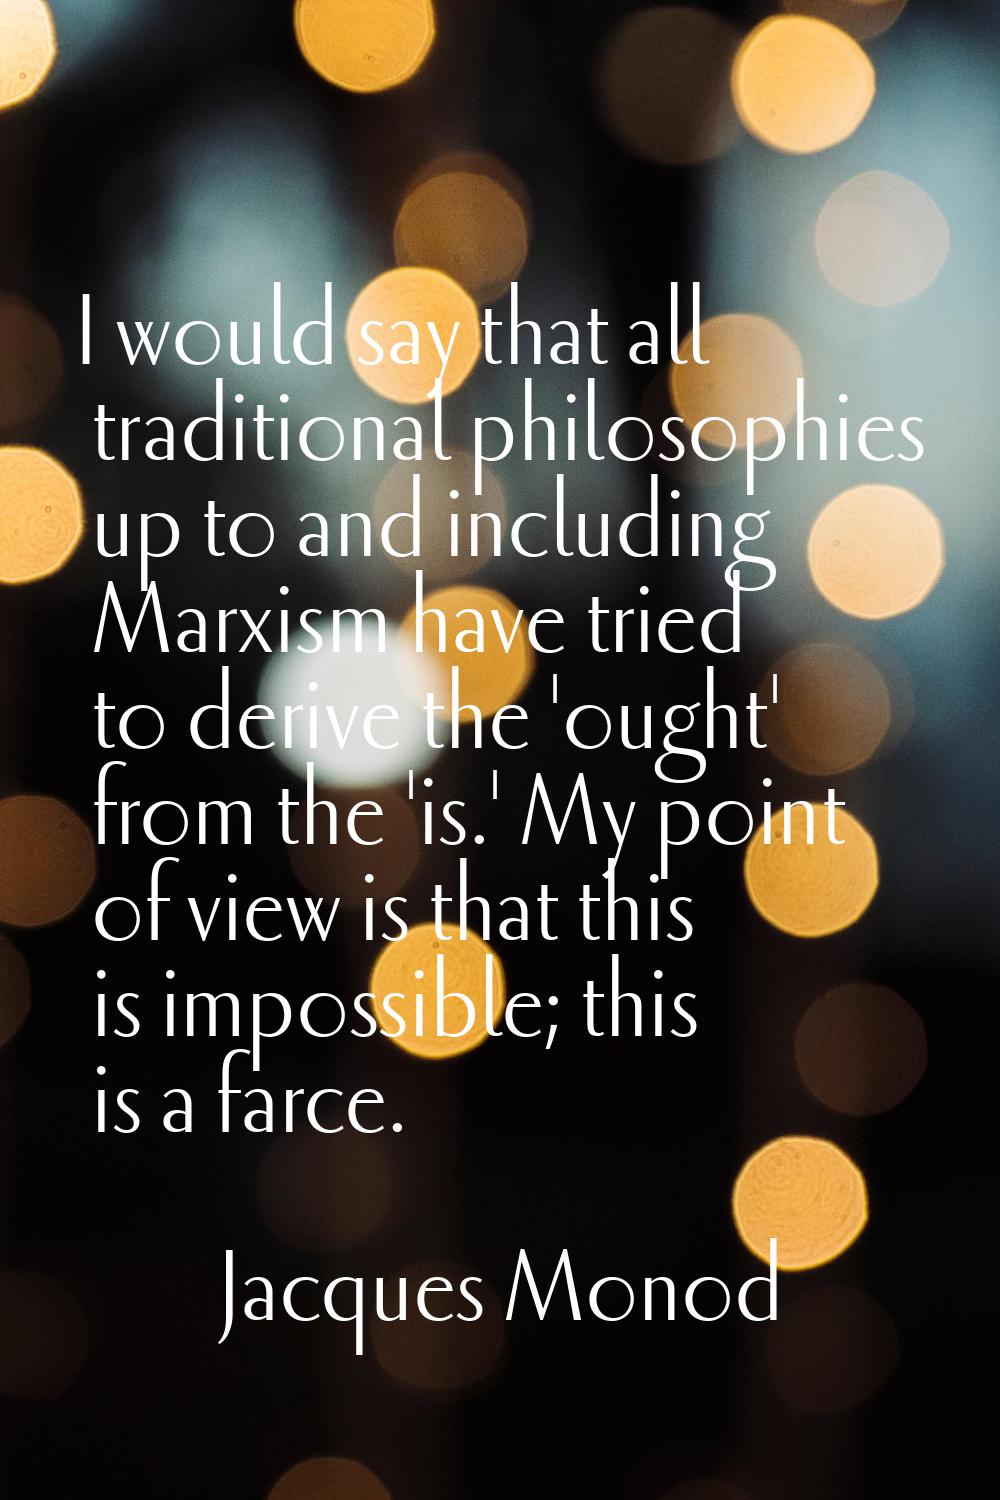 I would say that all traditional philosophies up to and including Marxism have tried to derive the 